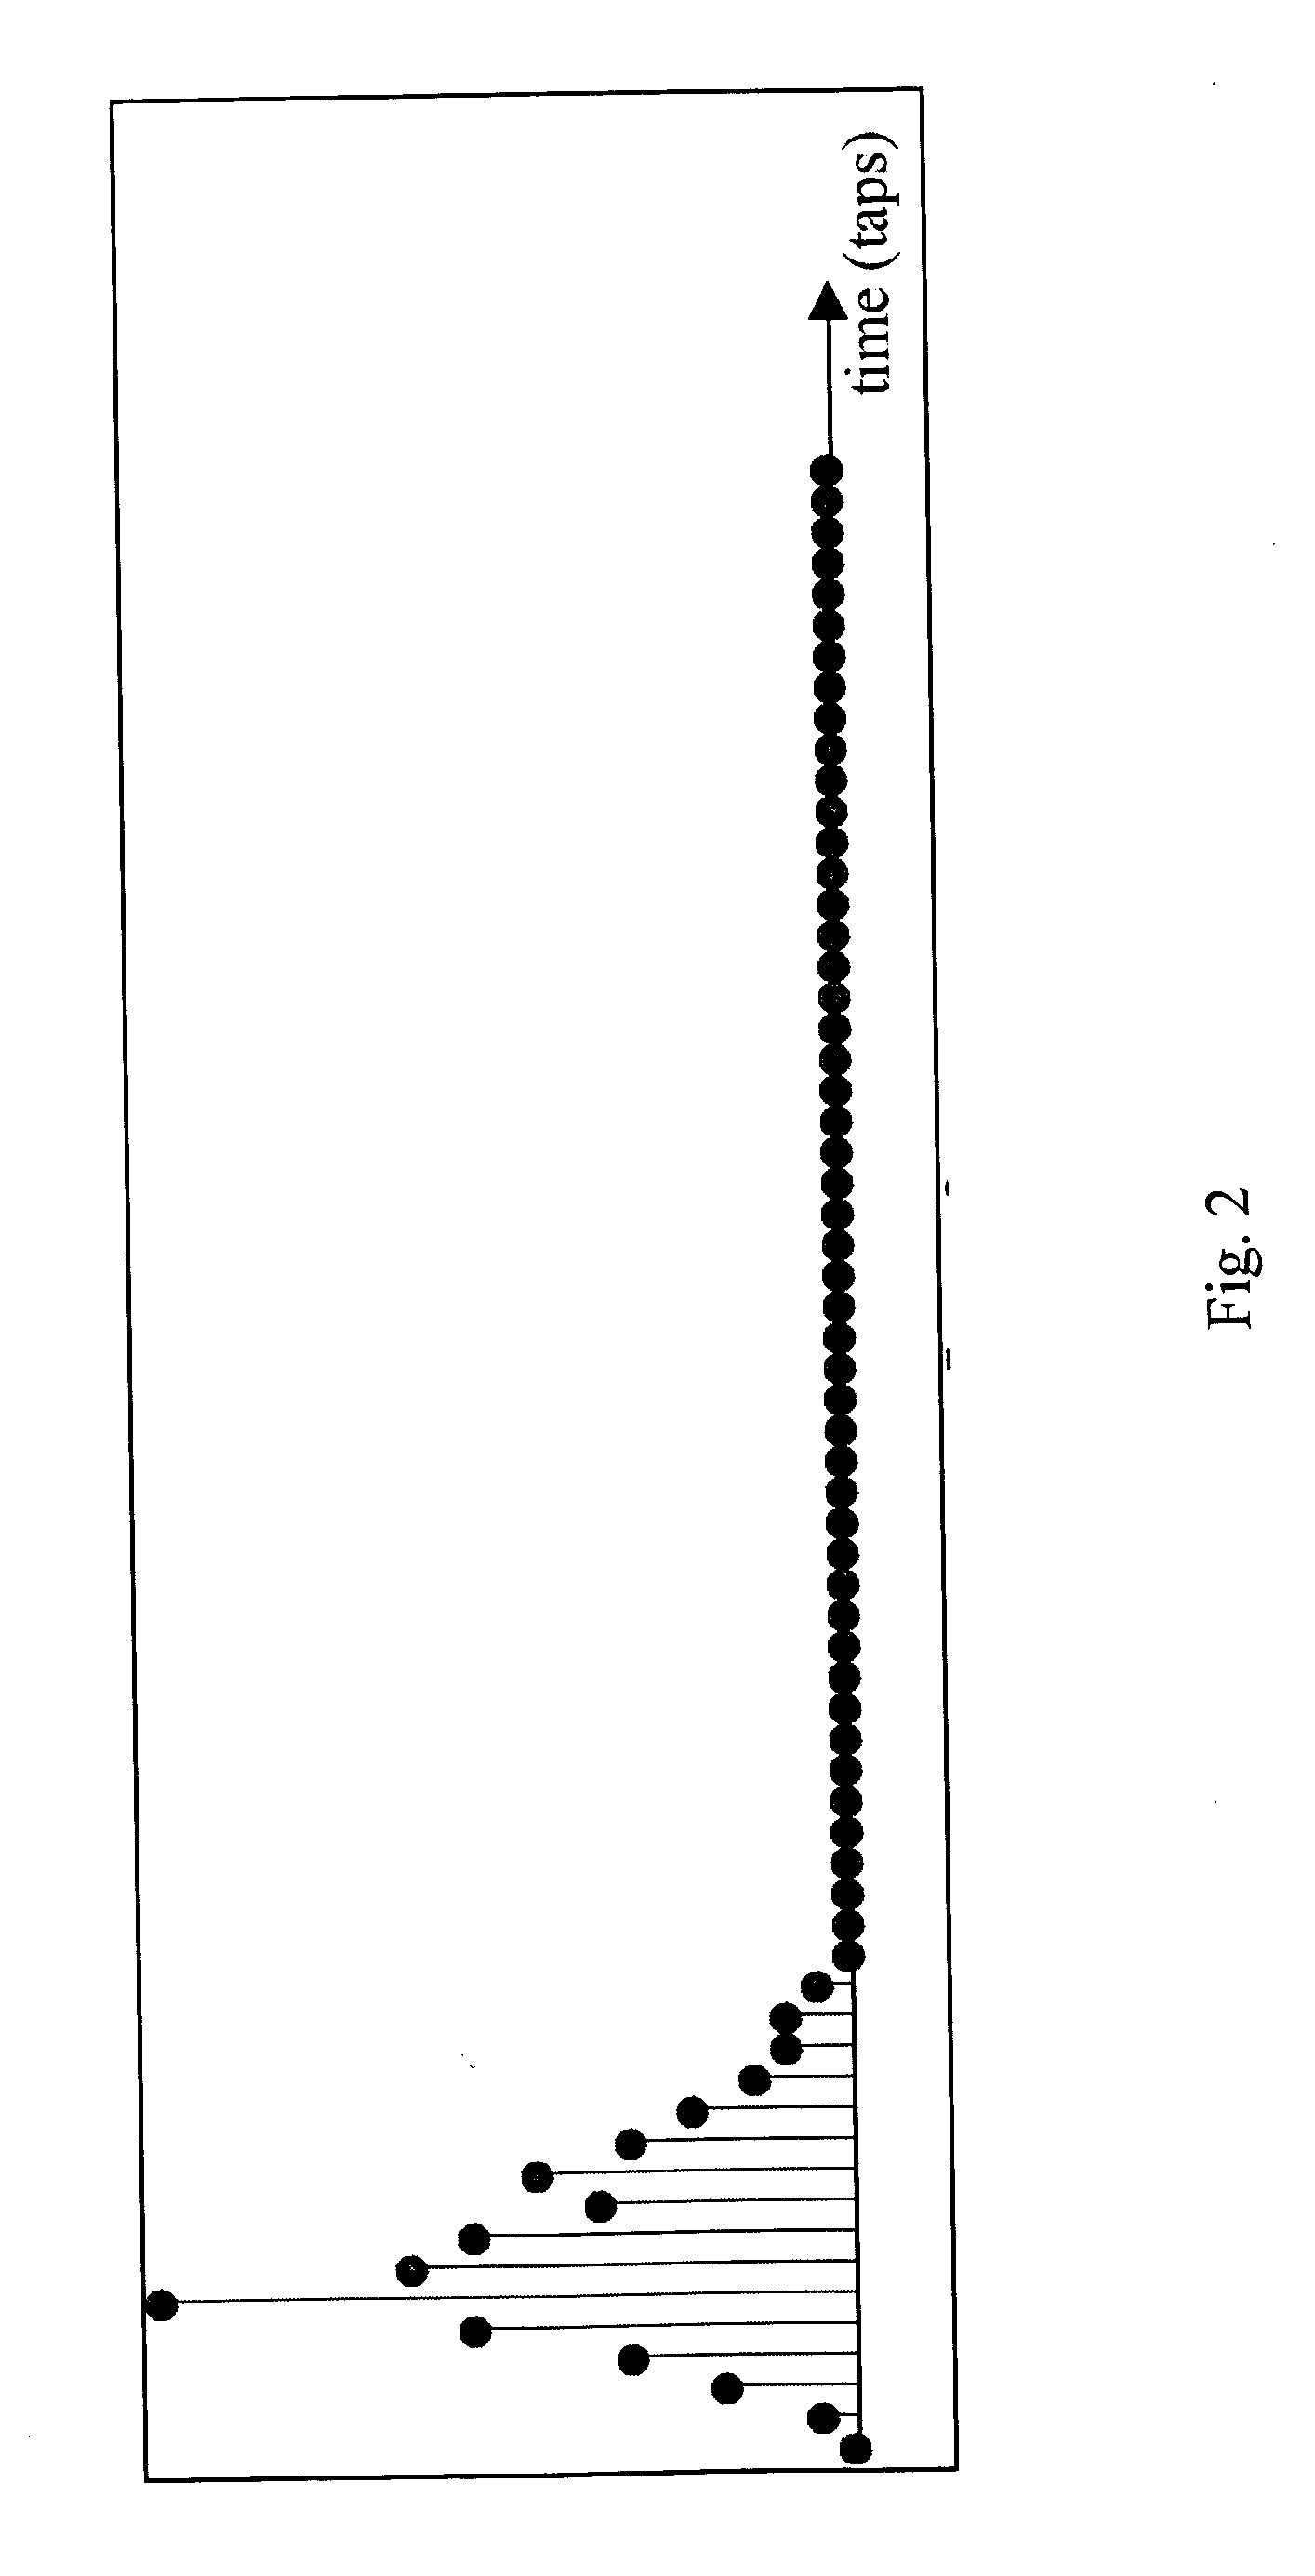 Method and apparatus for improving the quality of channel estimation algorithms using training sequences